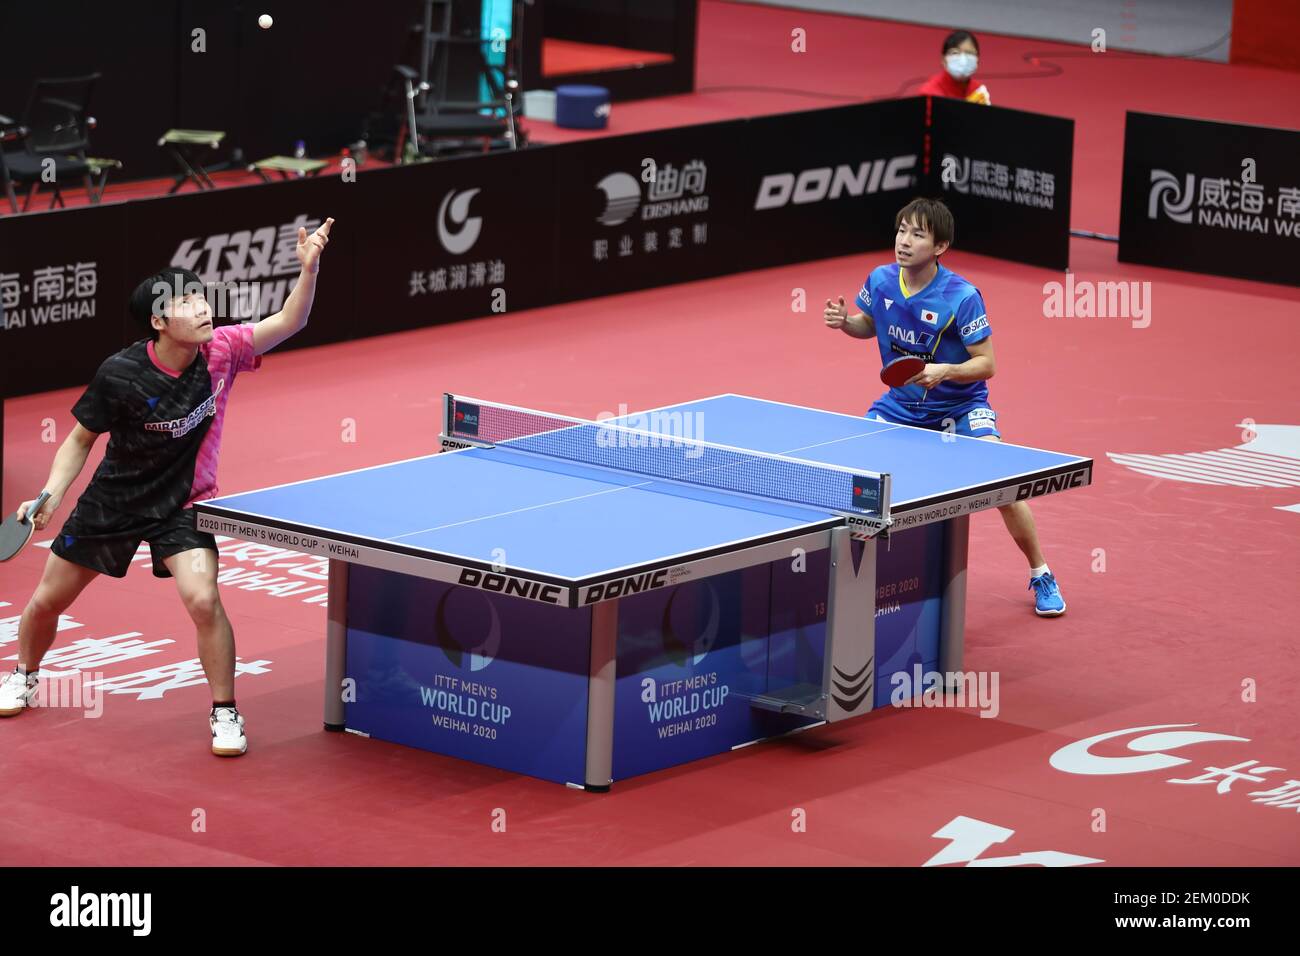 The 2020 International Table Tennis Federation (ITTF) men's World Cup is  held at the Olympic Center in Nanhai New Area of Weihai City, East China's  Shandong Province, November 14, 2020. NIWA Koki